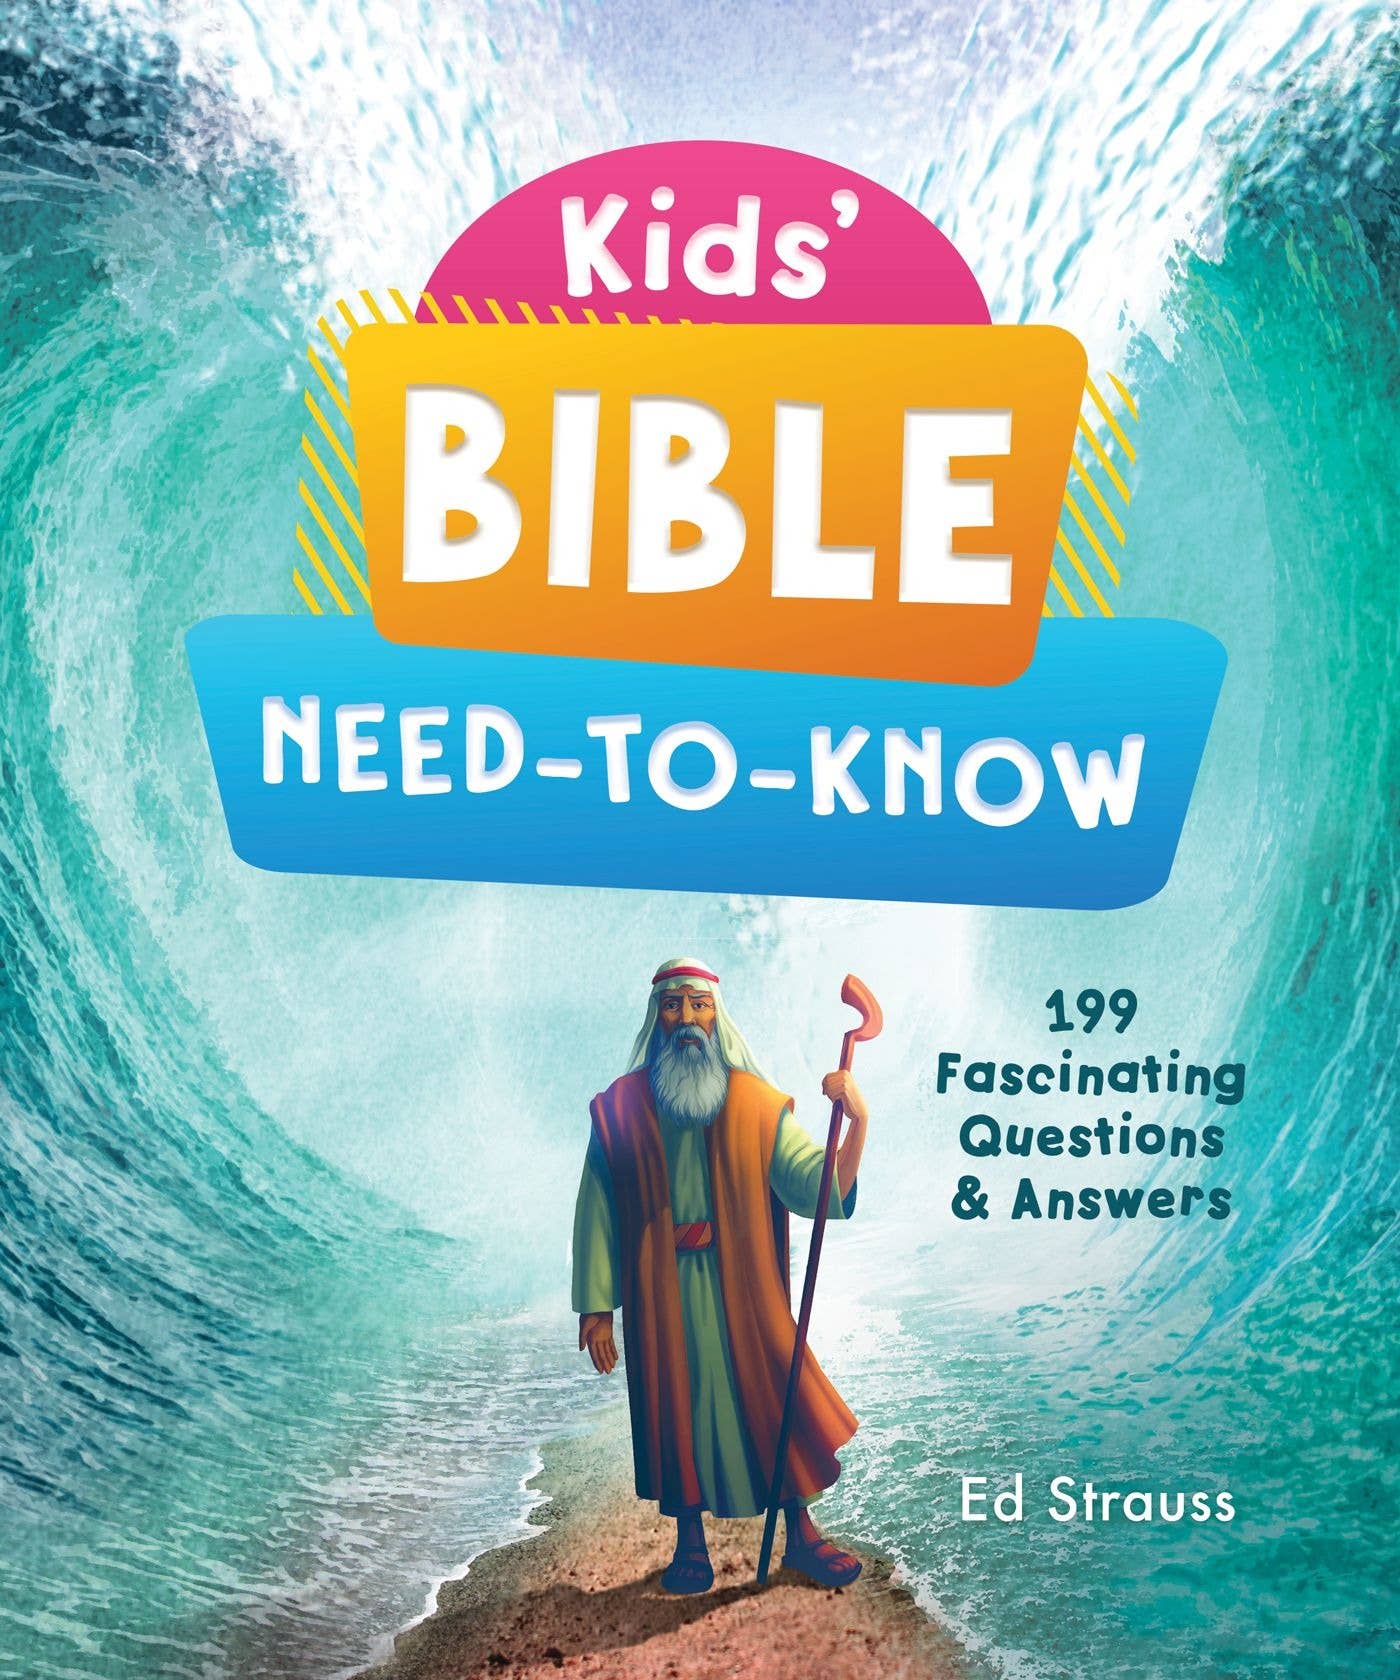 Kids' Bible Need-to-Know